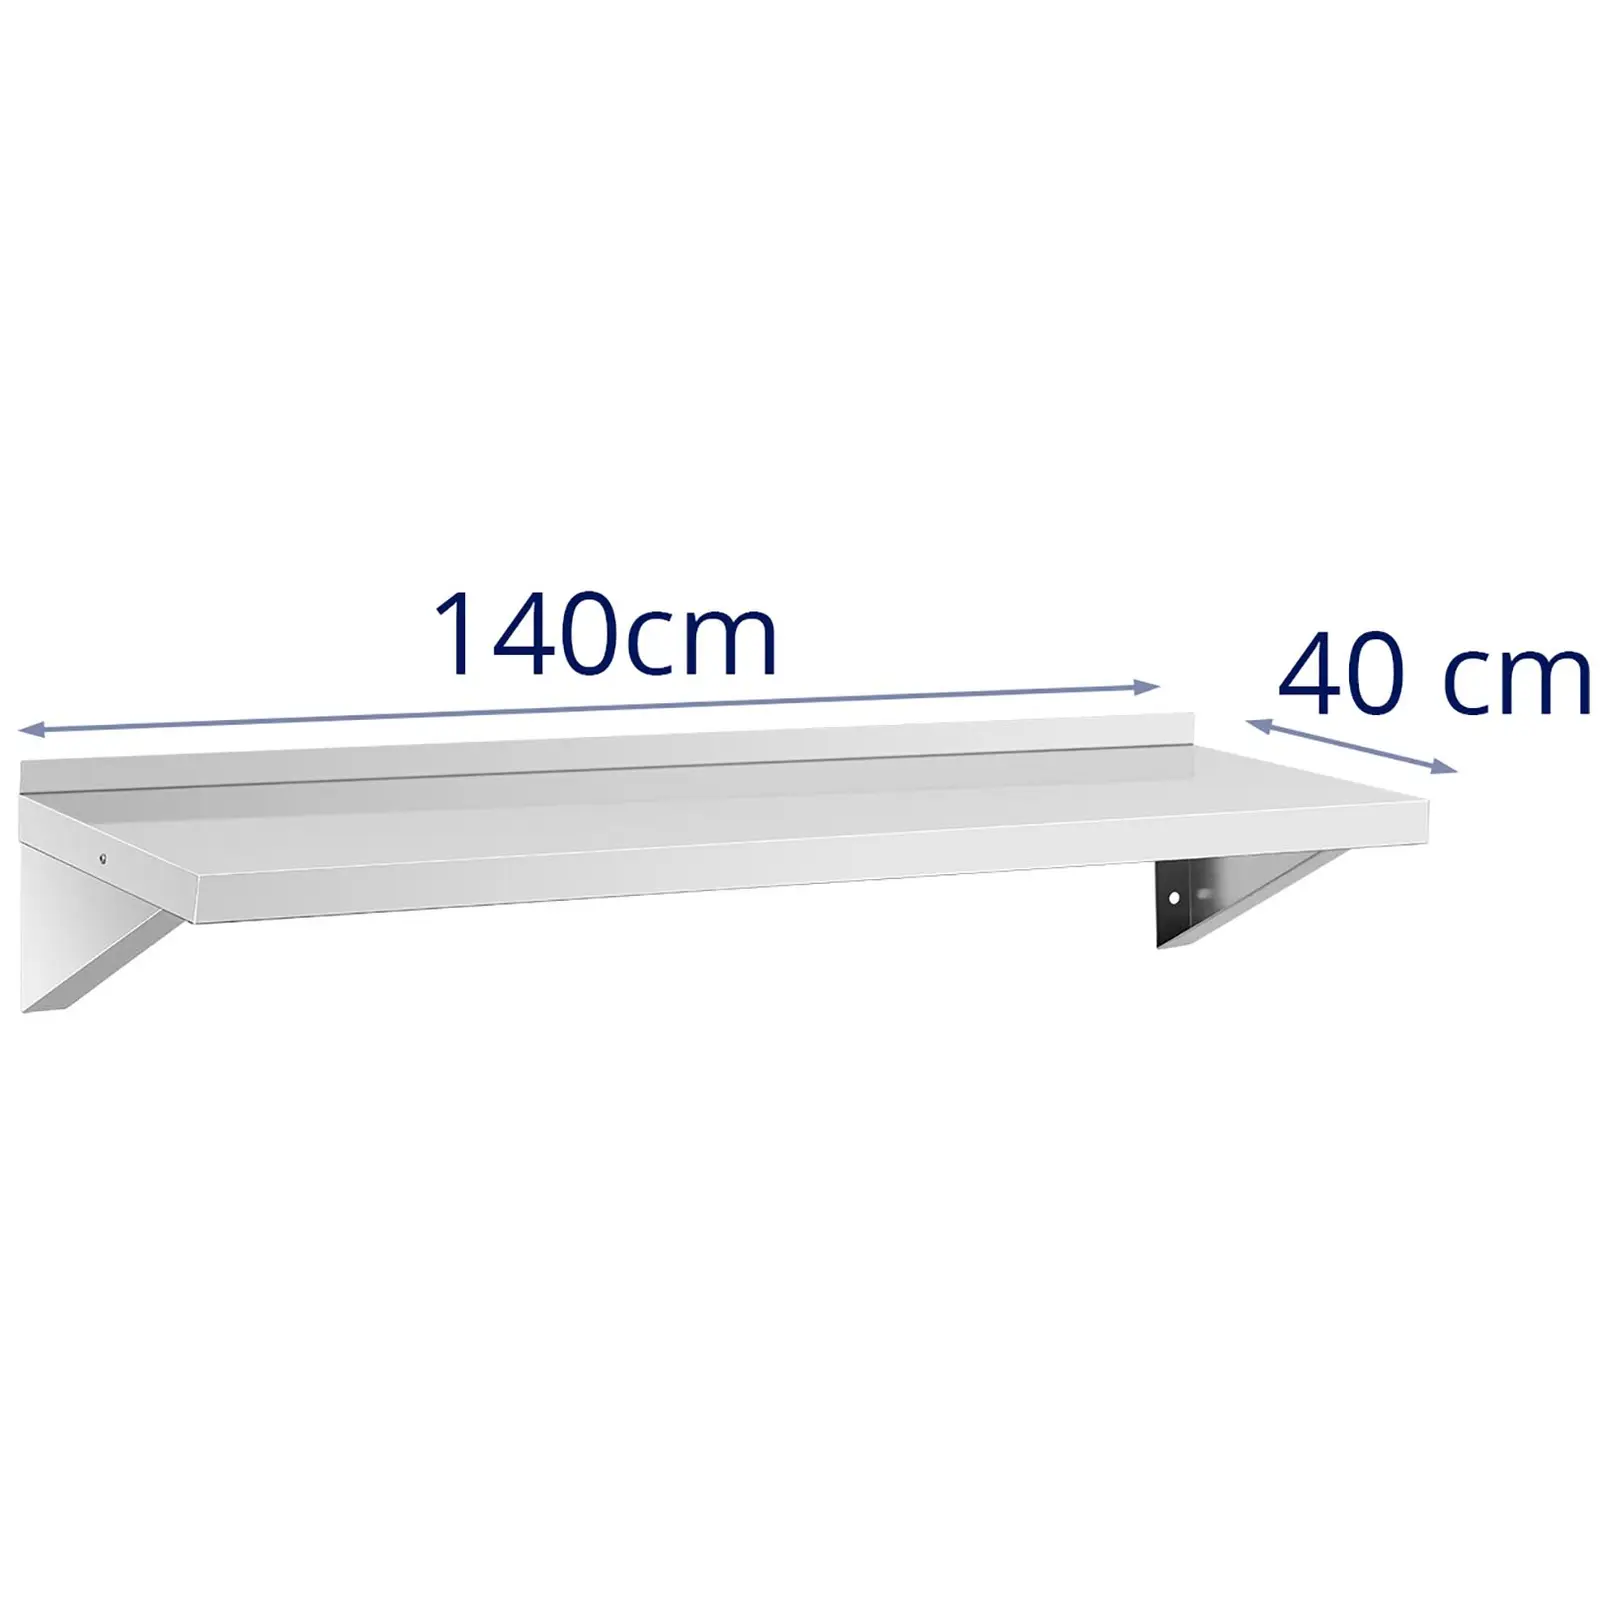 Wall Shelf - stainless steel - 120 x 40 cm - up to 80 kg - Royal Catering